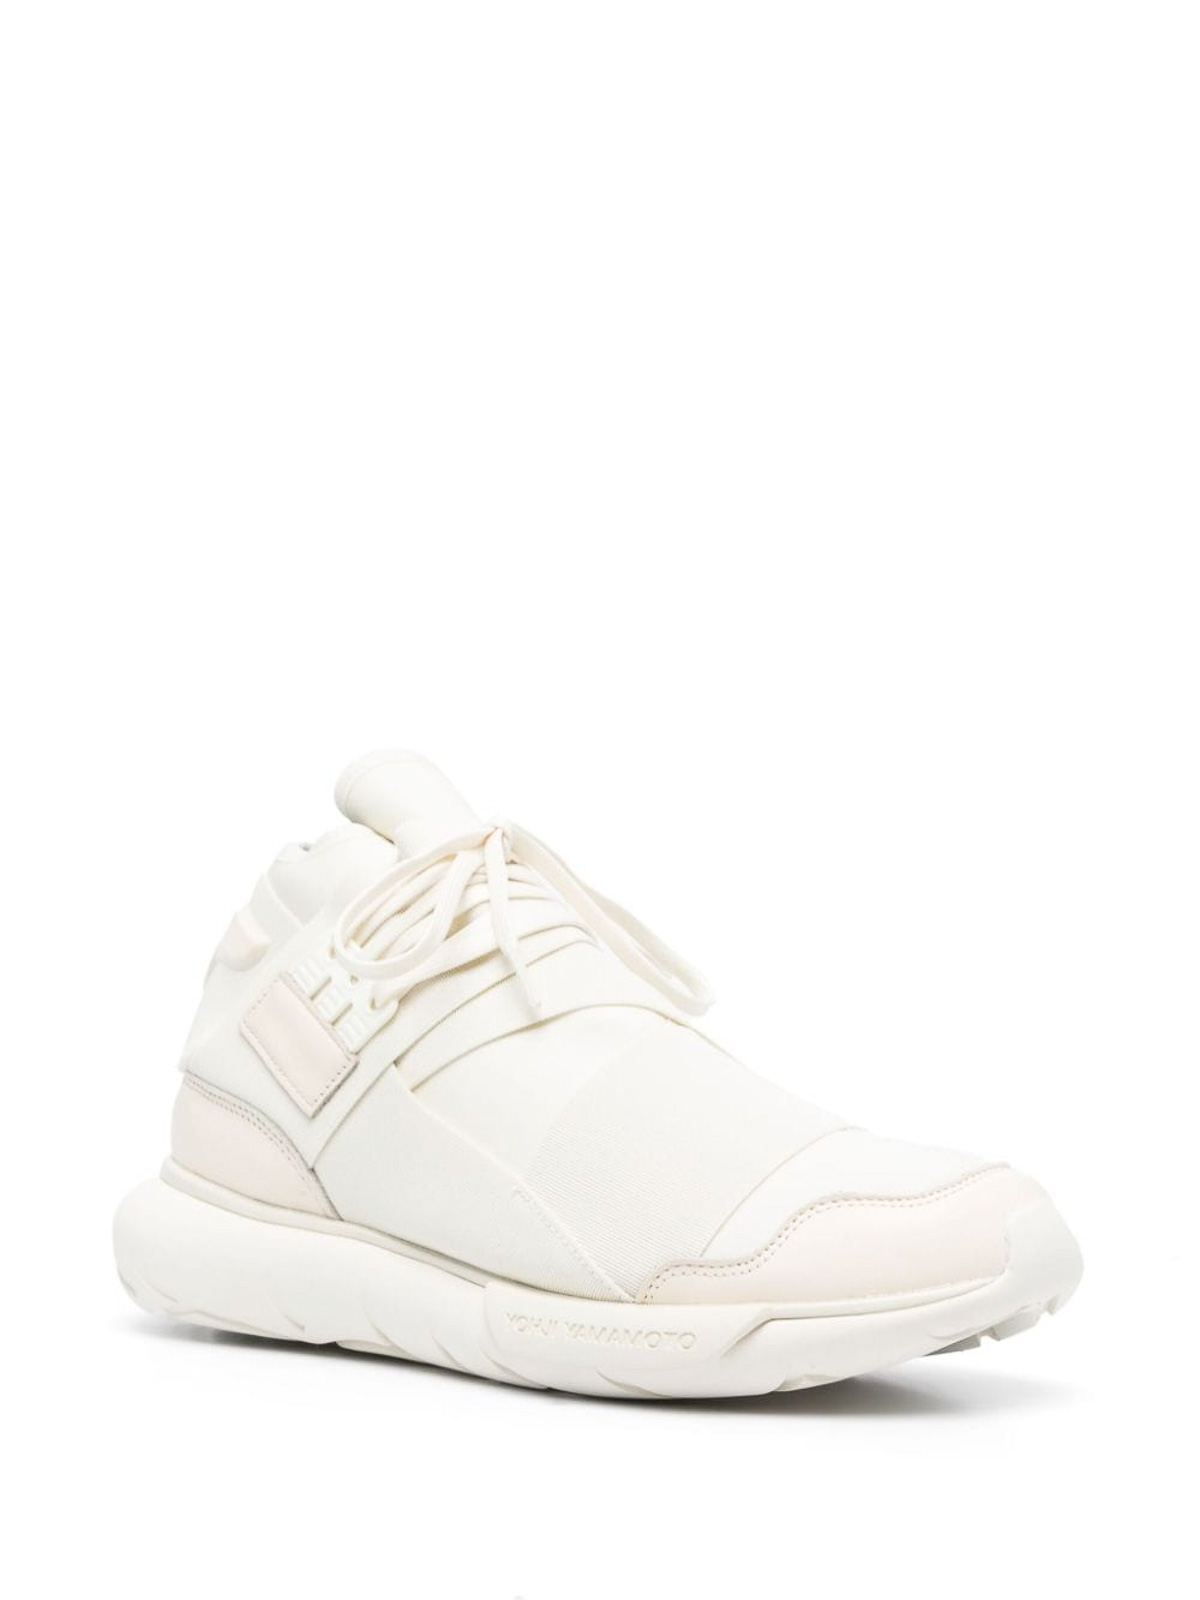 Trainers Y-3 - Y-3 qasa sneakers - ID2927 | Shop online at THEBS [iKRIX]